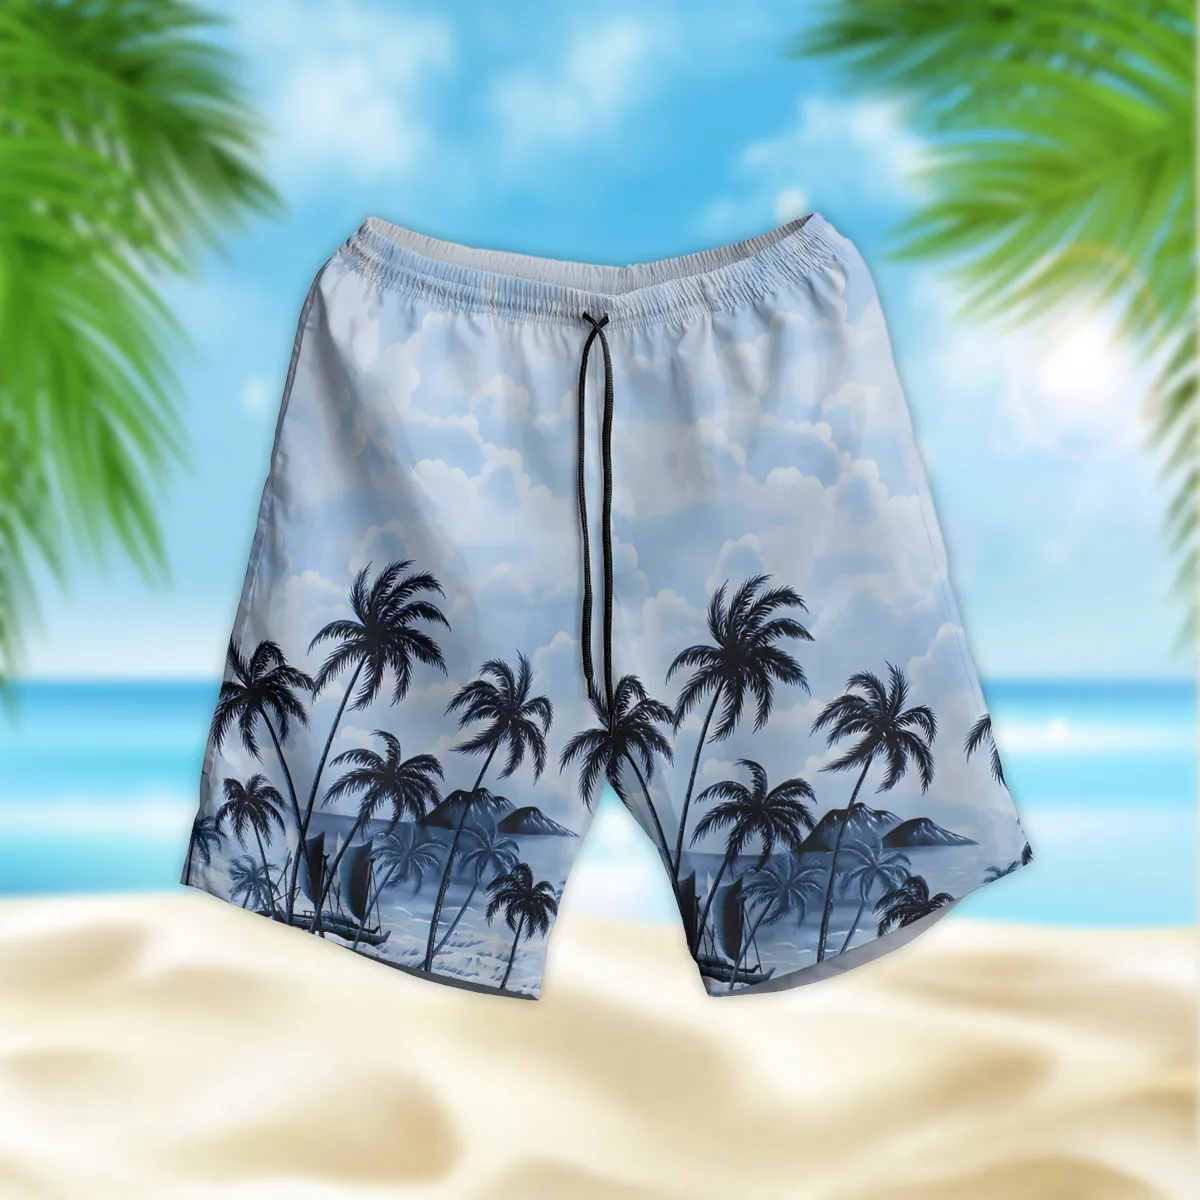 A-6 Intruder Hawaii Style Palm Tree U.S. Marine Corps Beach Short All Over Prints Gift Loves